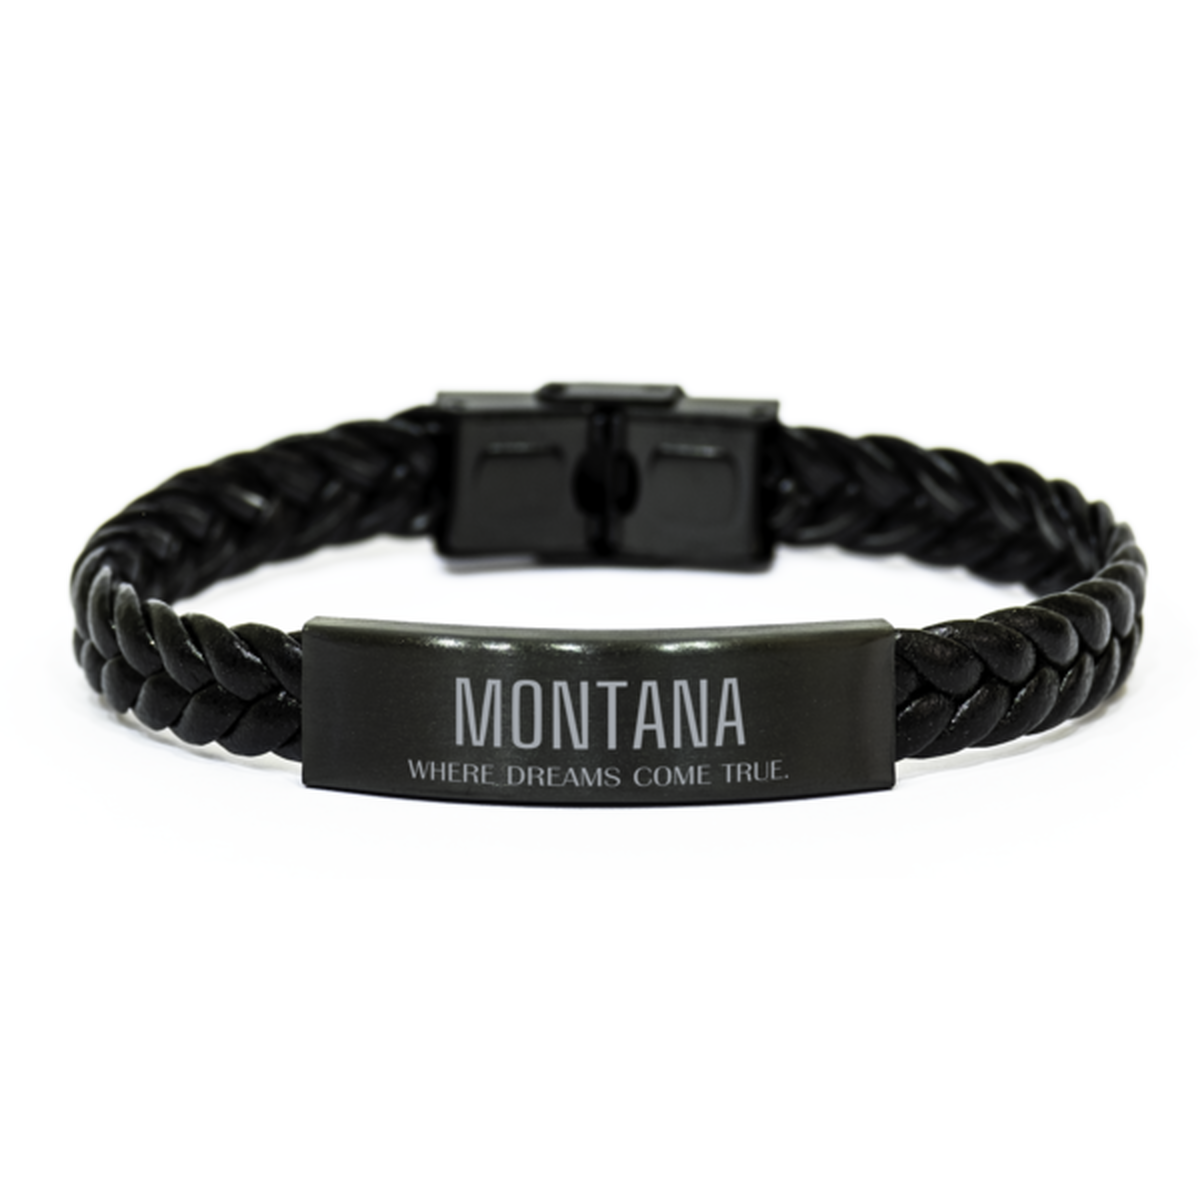 Love Montana State Braided Leather Bracelet, Montana Where dreams come true, Birthday Inspirational Gifts For Montana Men, Women, Friends